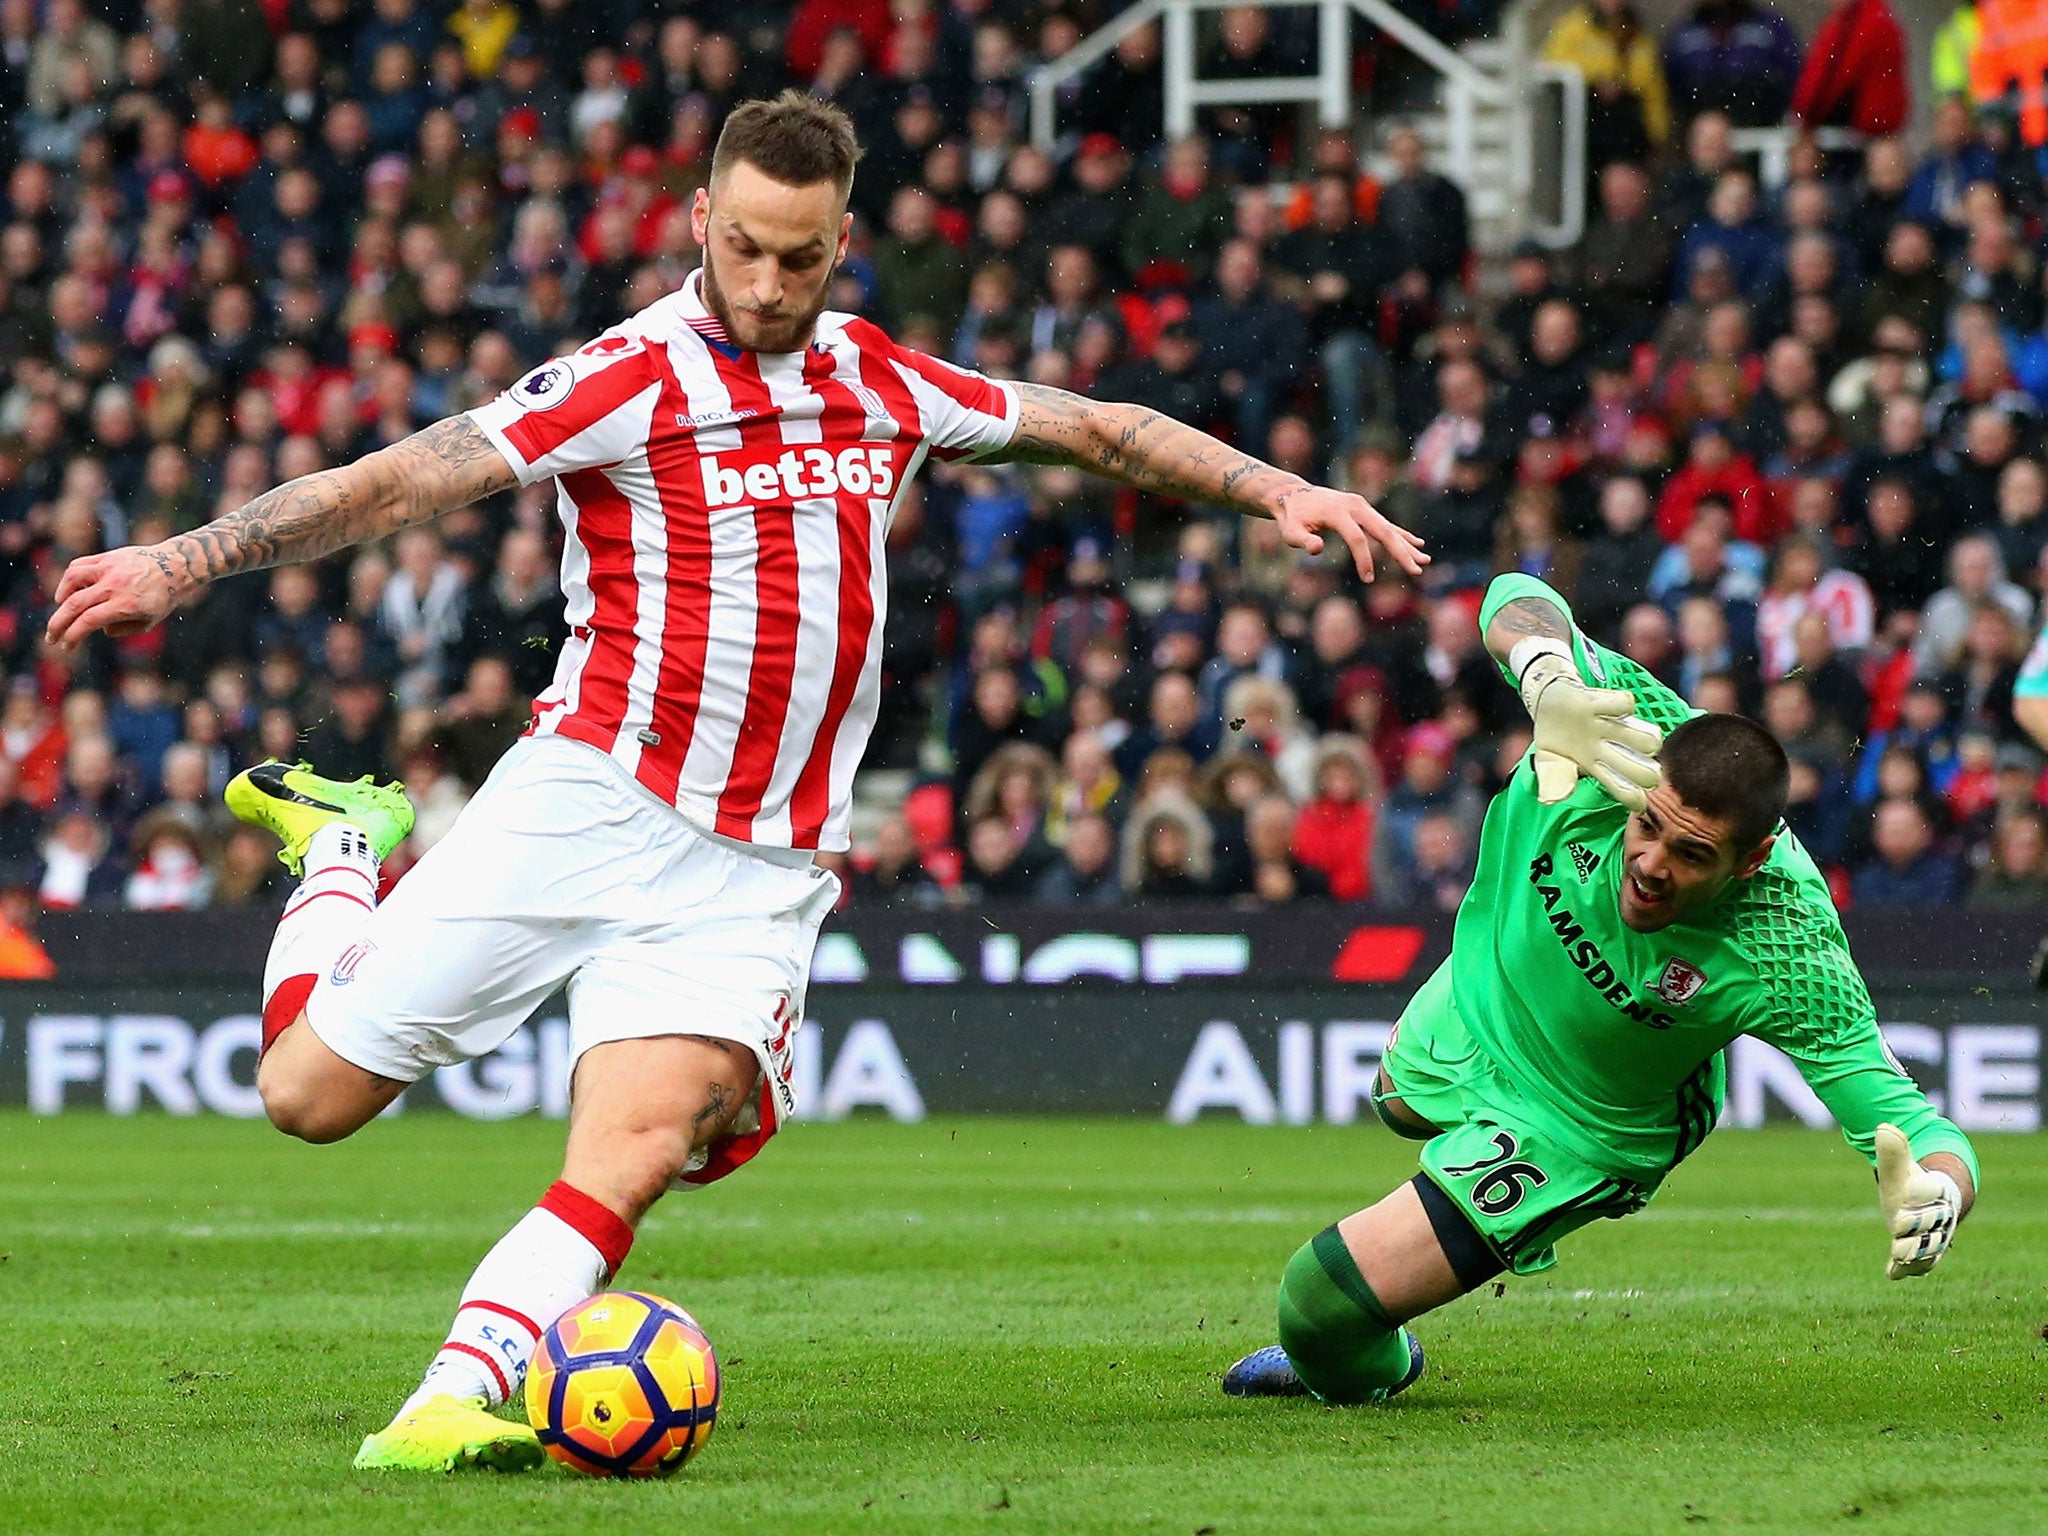 Mark Arnautovic's two goals condemned Middlesbrough to a 2-0 defeat at Stoke